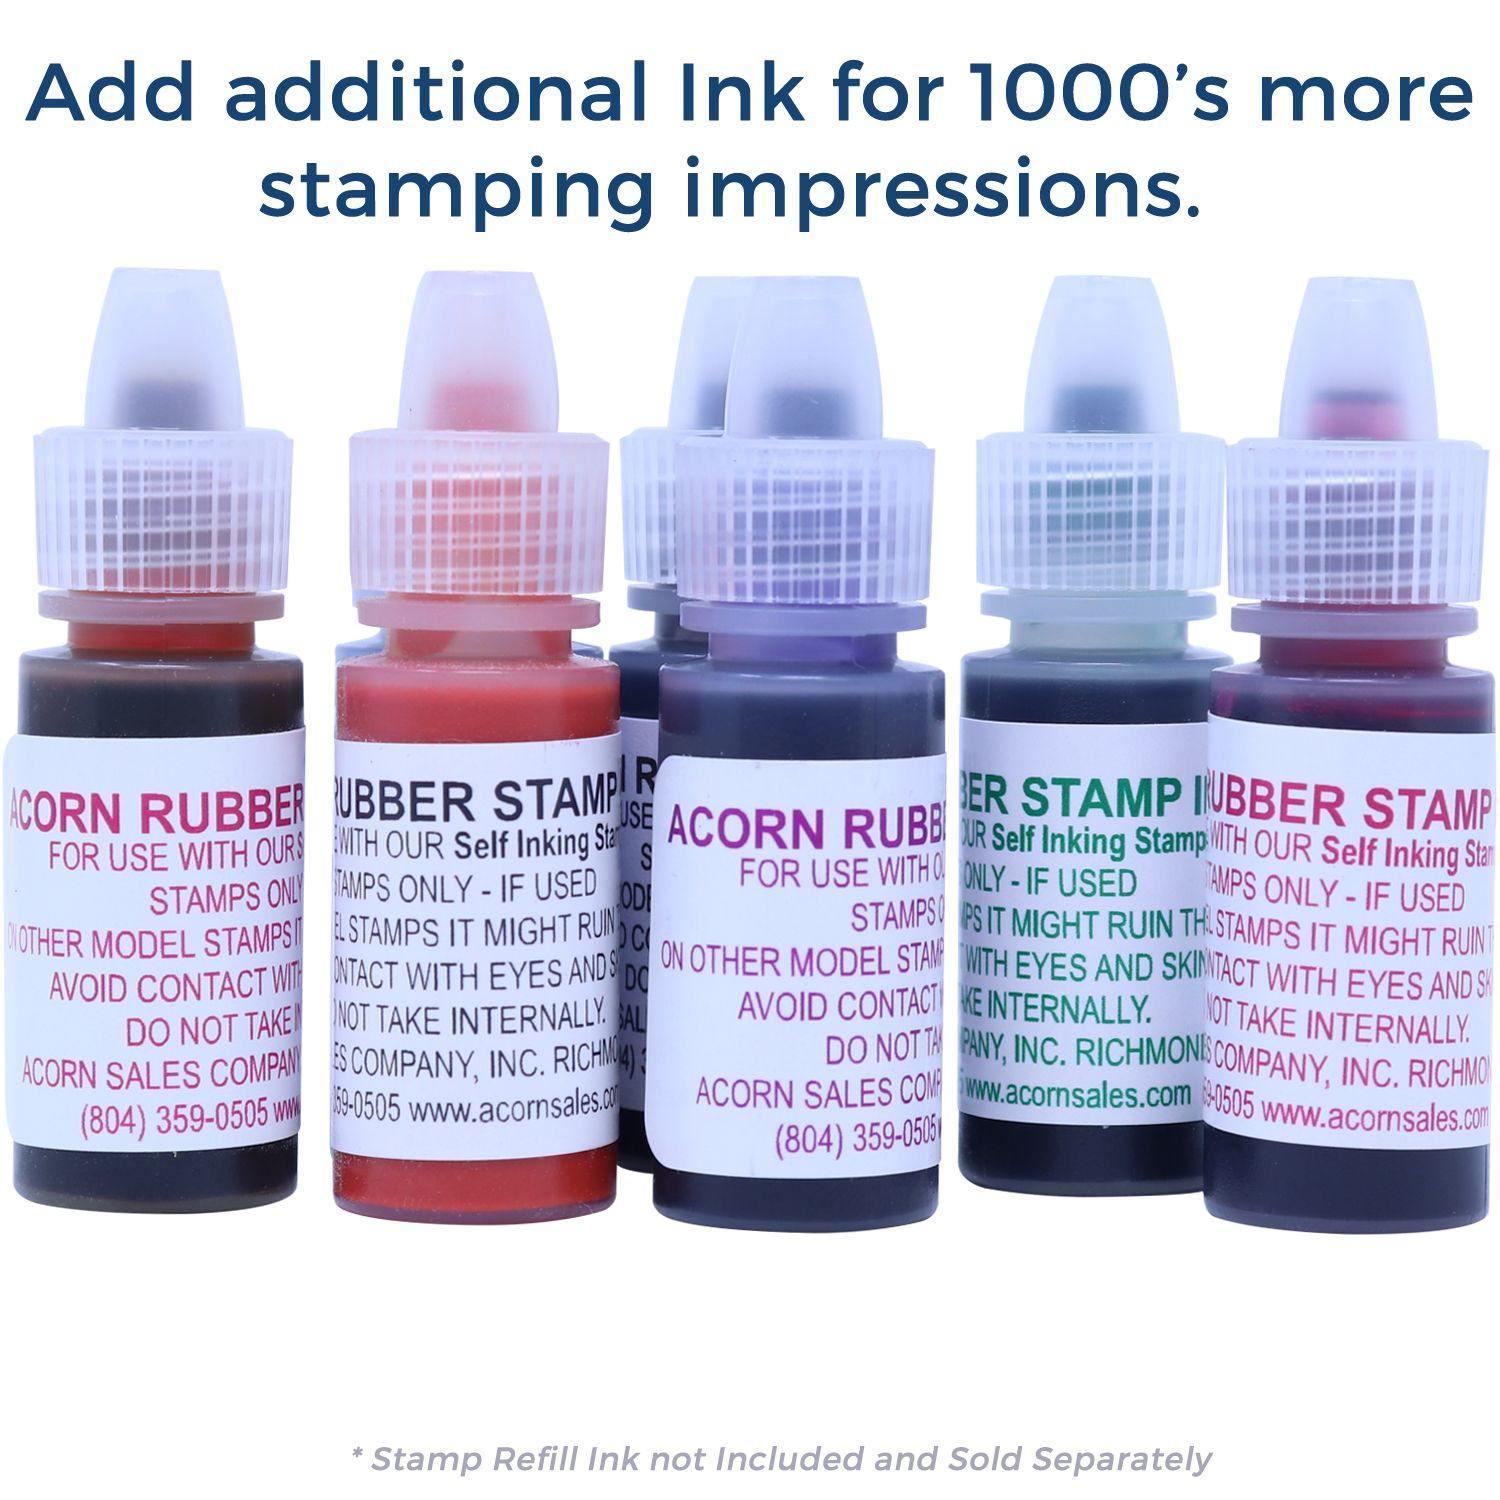 Refill Inks for Large Pre-Inked Check Your Work Stamp Available